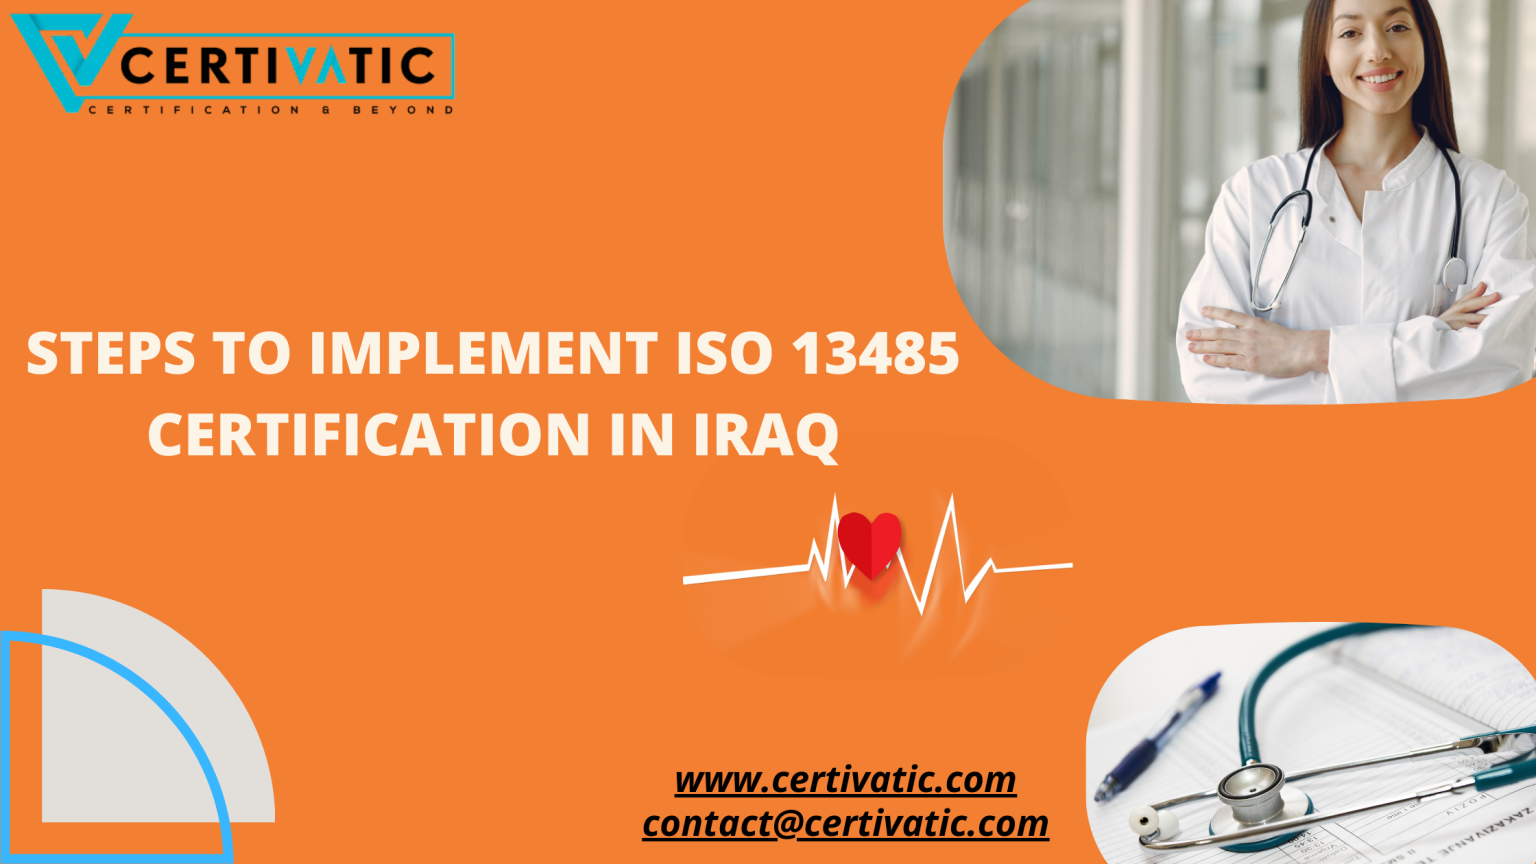 What are the Steps to implement the ISO 13485 Certification in Iraq?